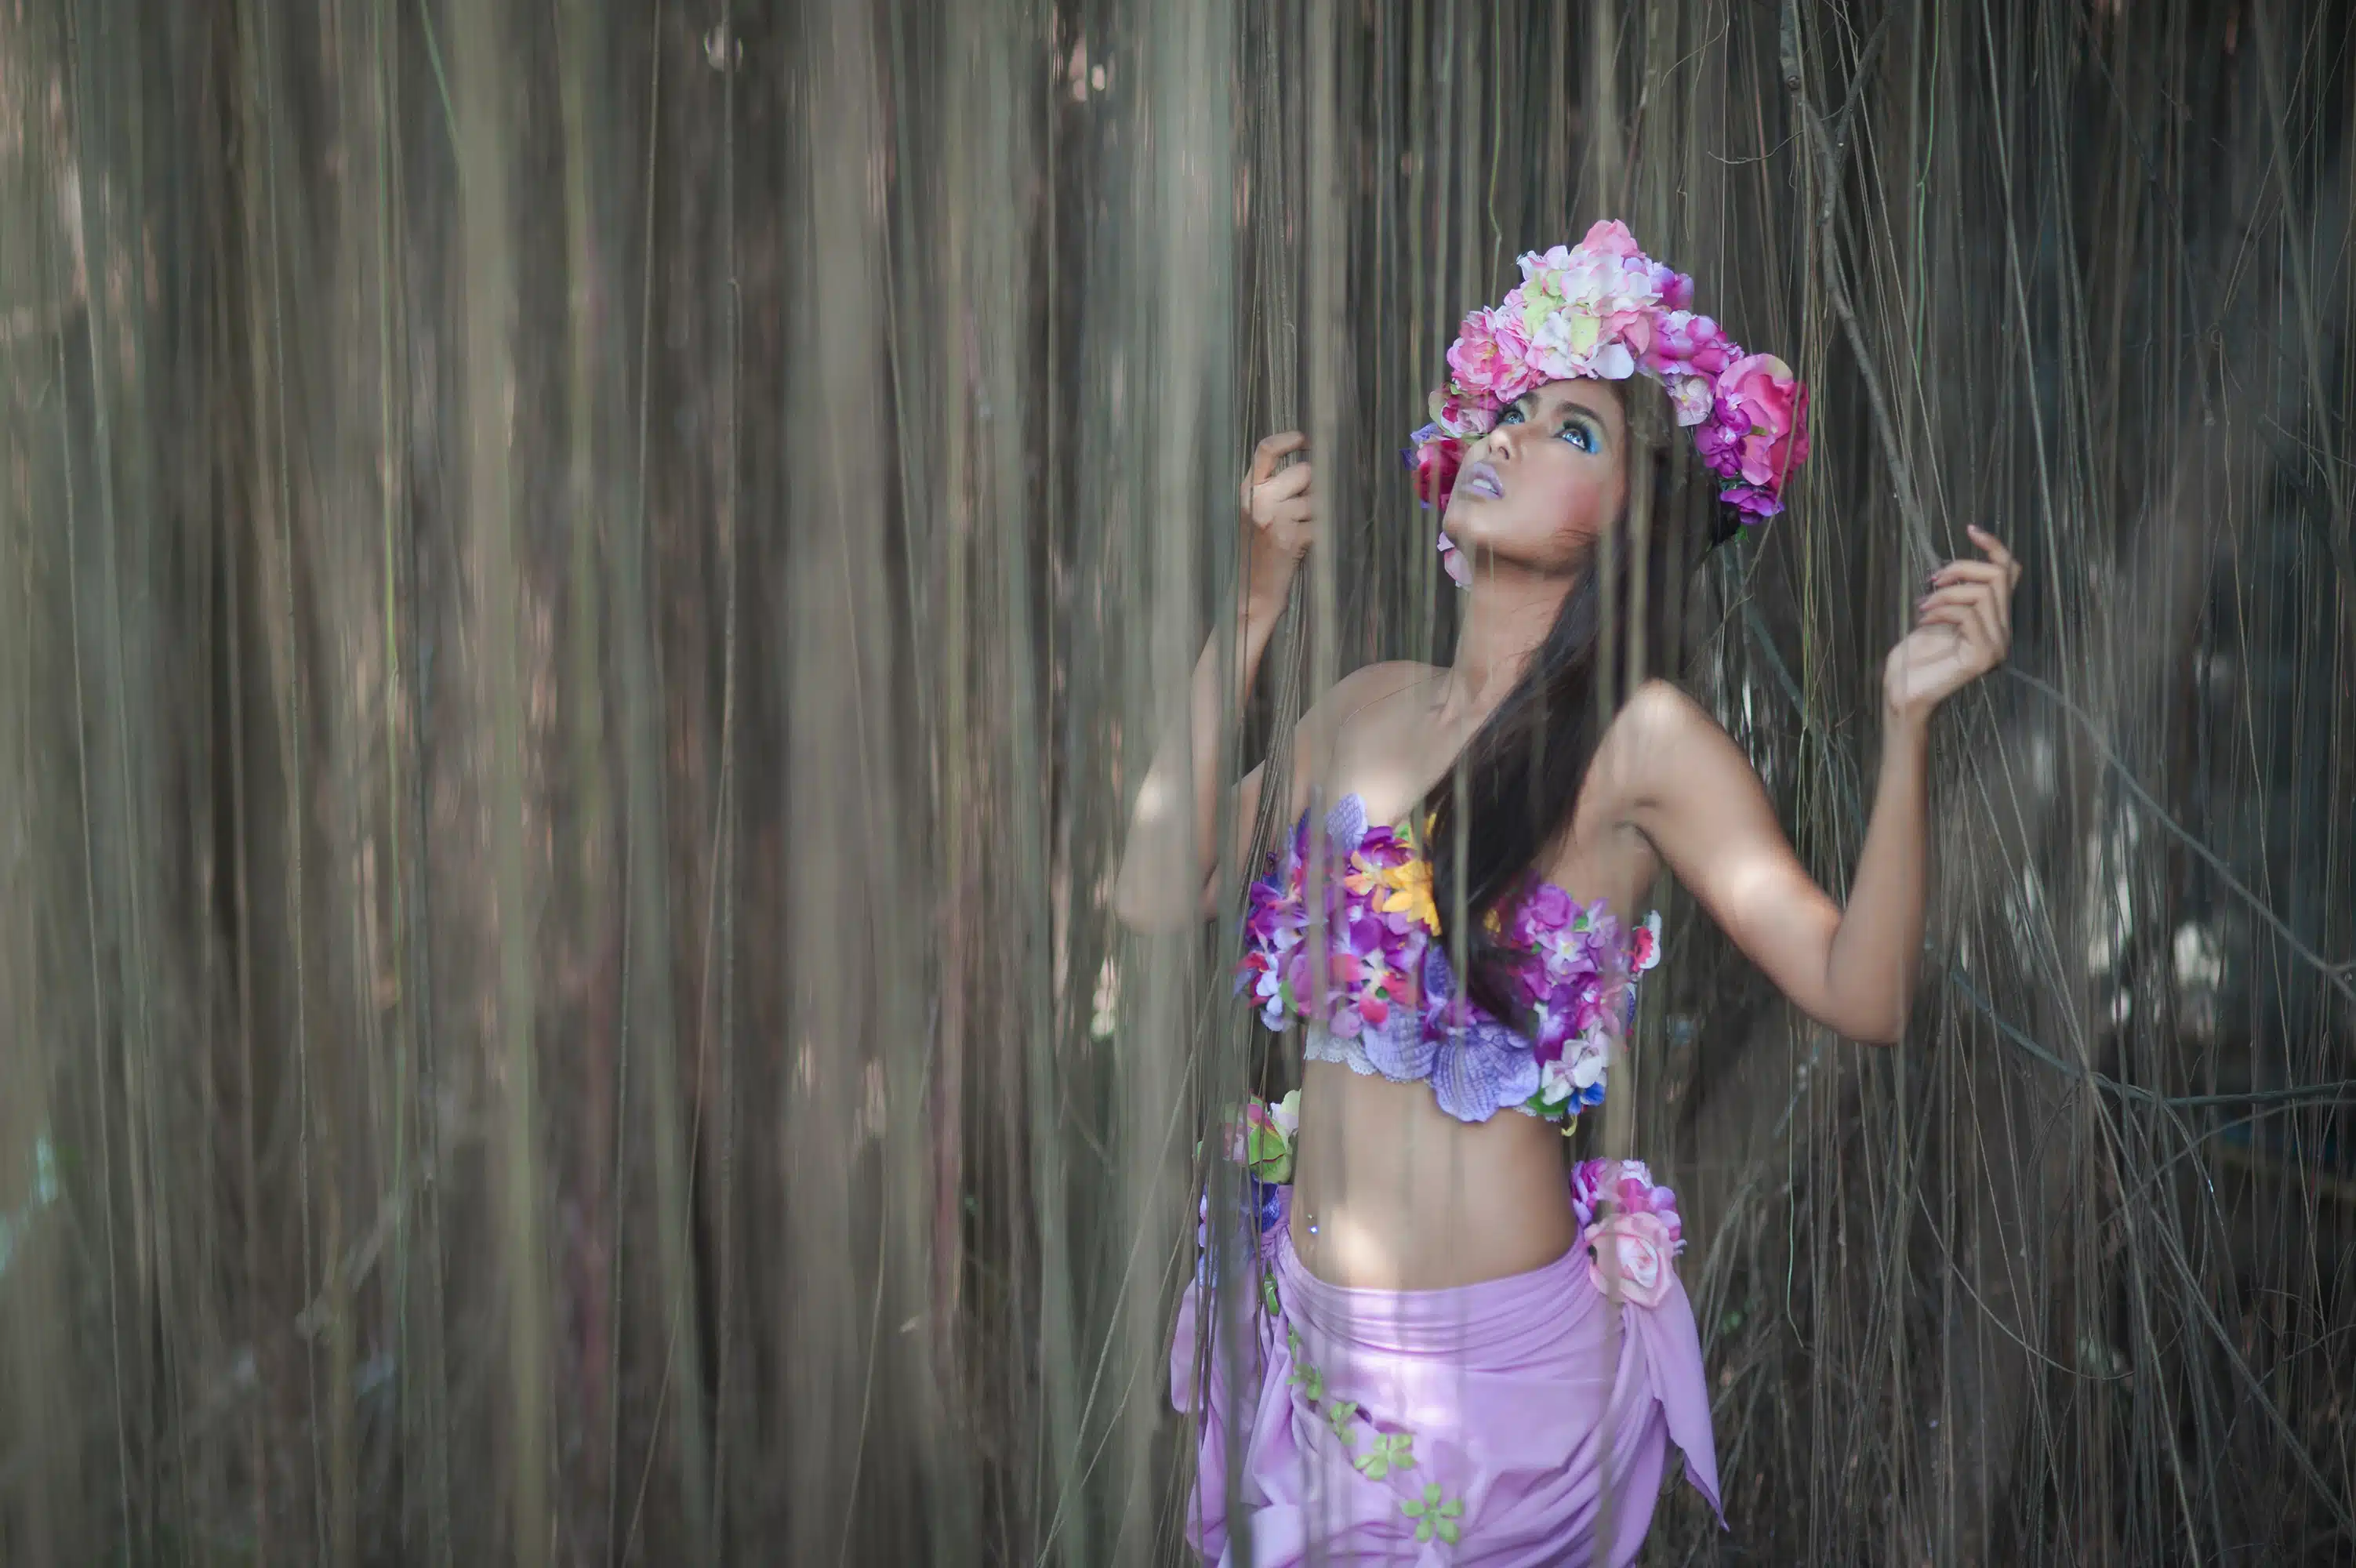 Young Asian Woman Tanned Skin And Black Shine Long Hair with flowers costume design. 